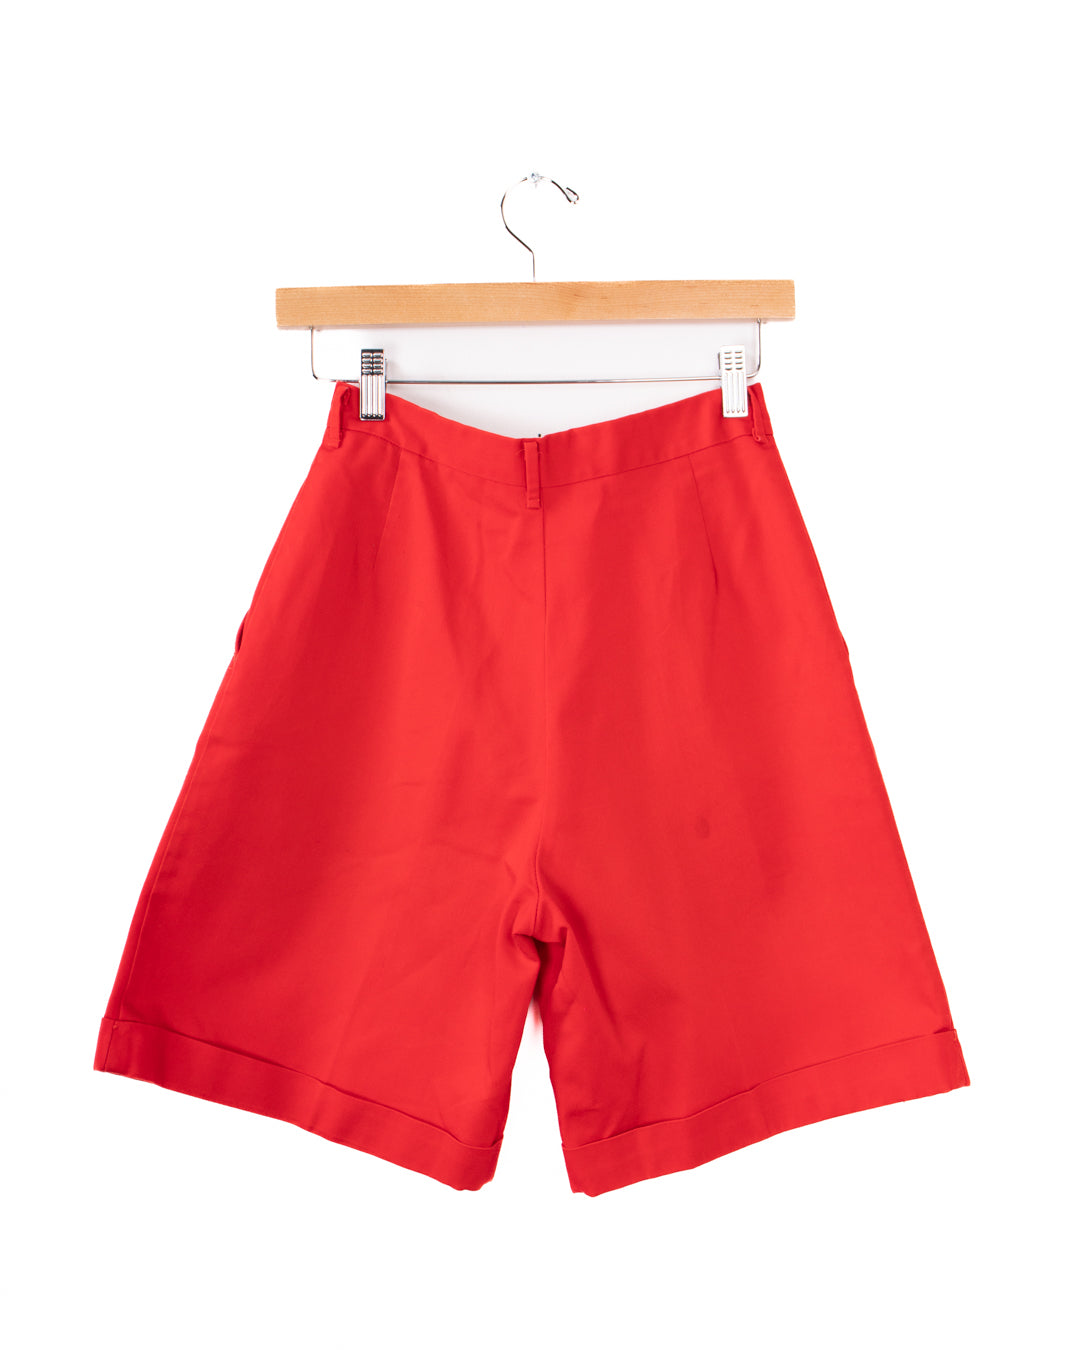 90s Spinnaker Sport Pleated Red Shorts